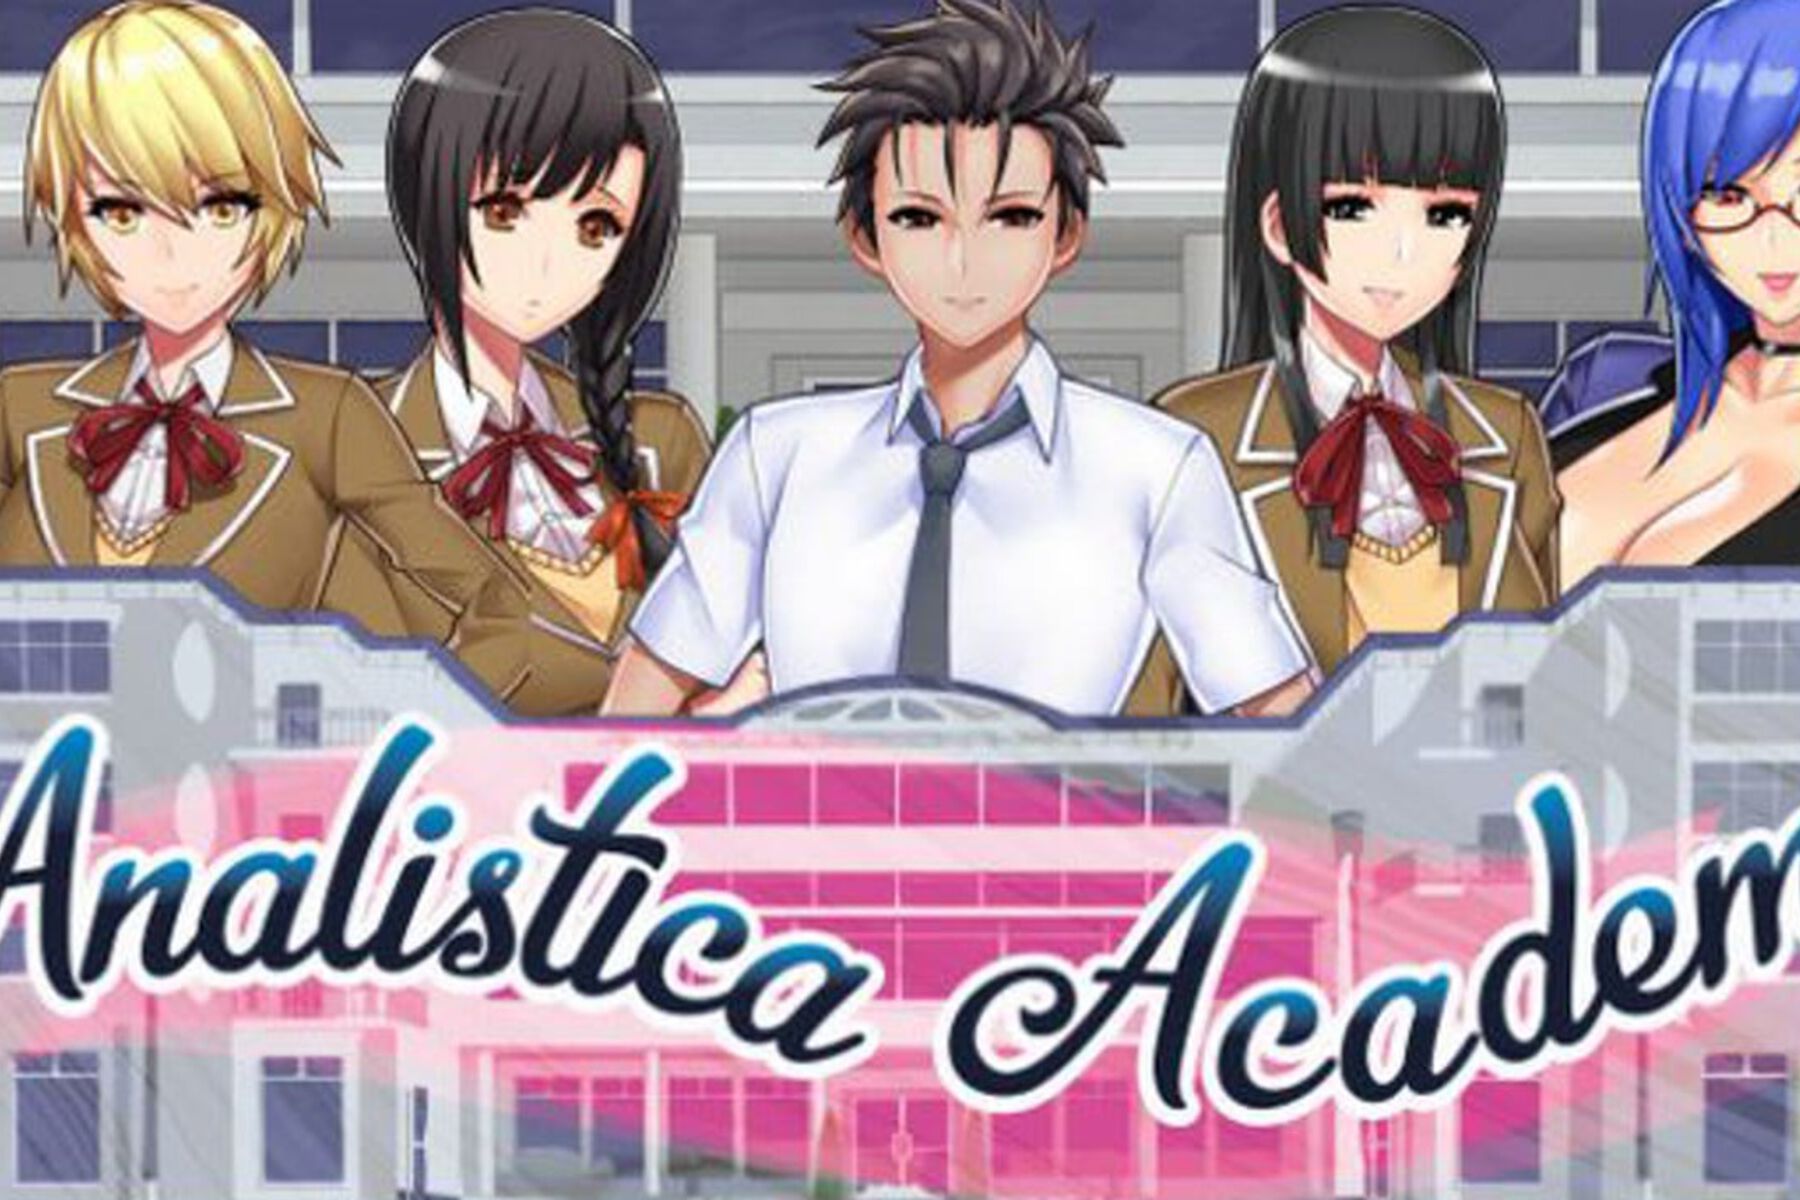 Analistica Academy artwork with 5 characters